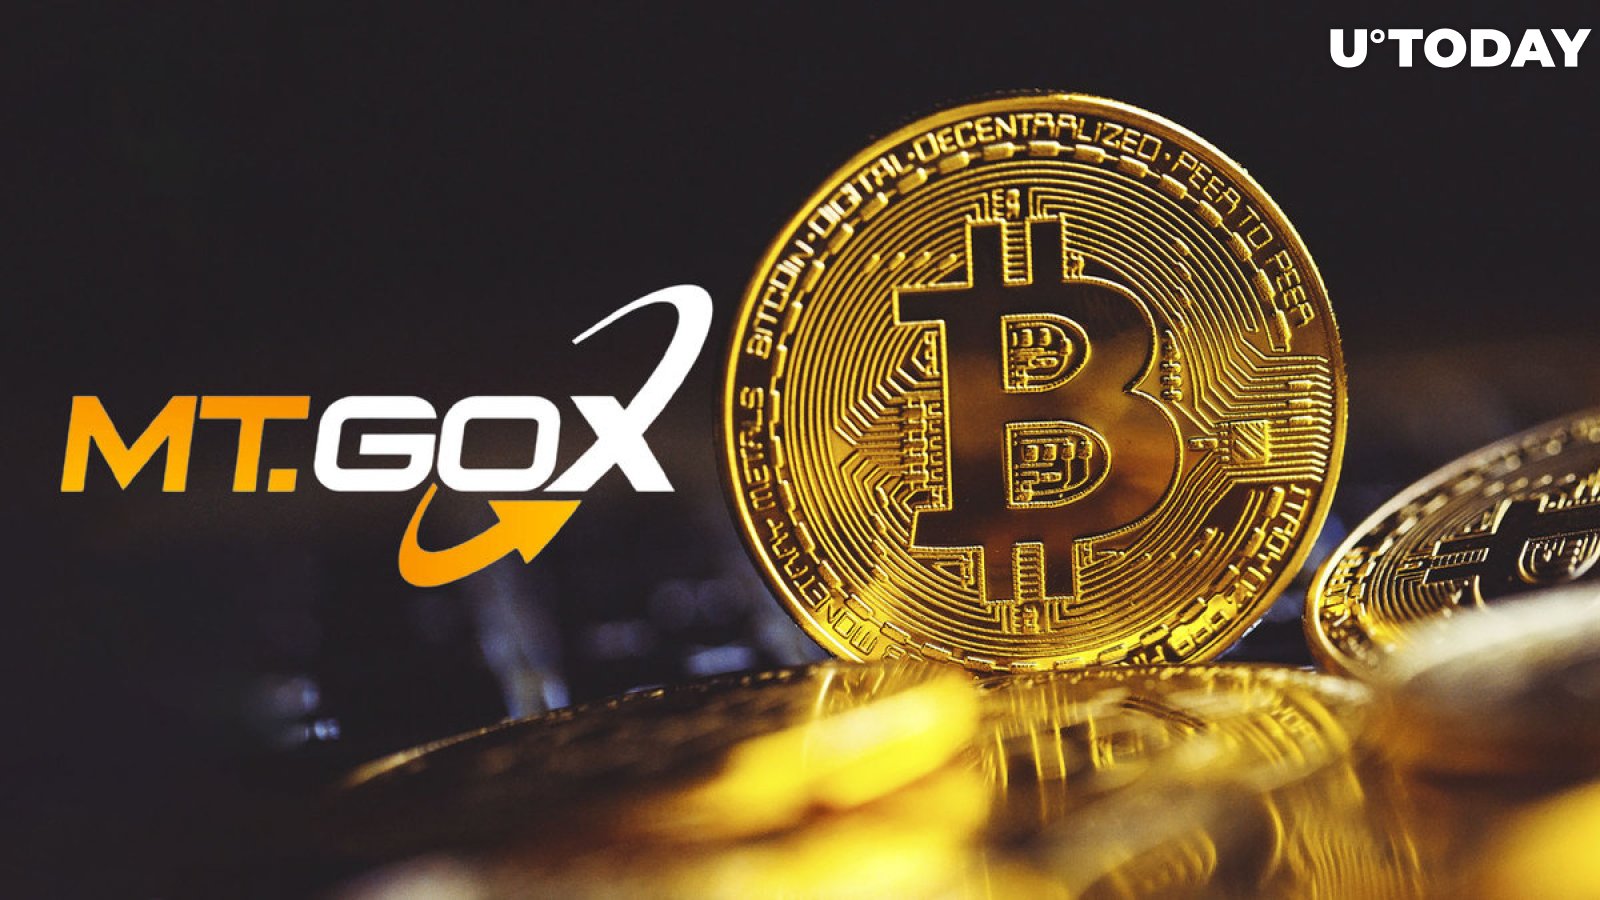 Bitcoin Plunges as Mt. Gox Starts Distributing Funds to Creditors 